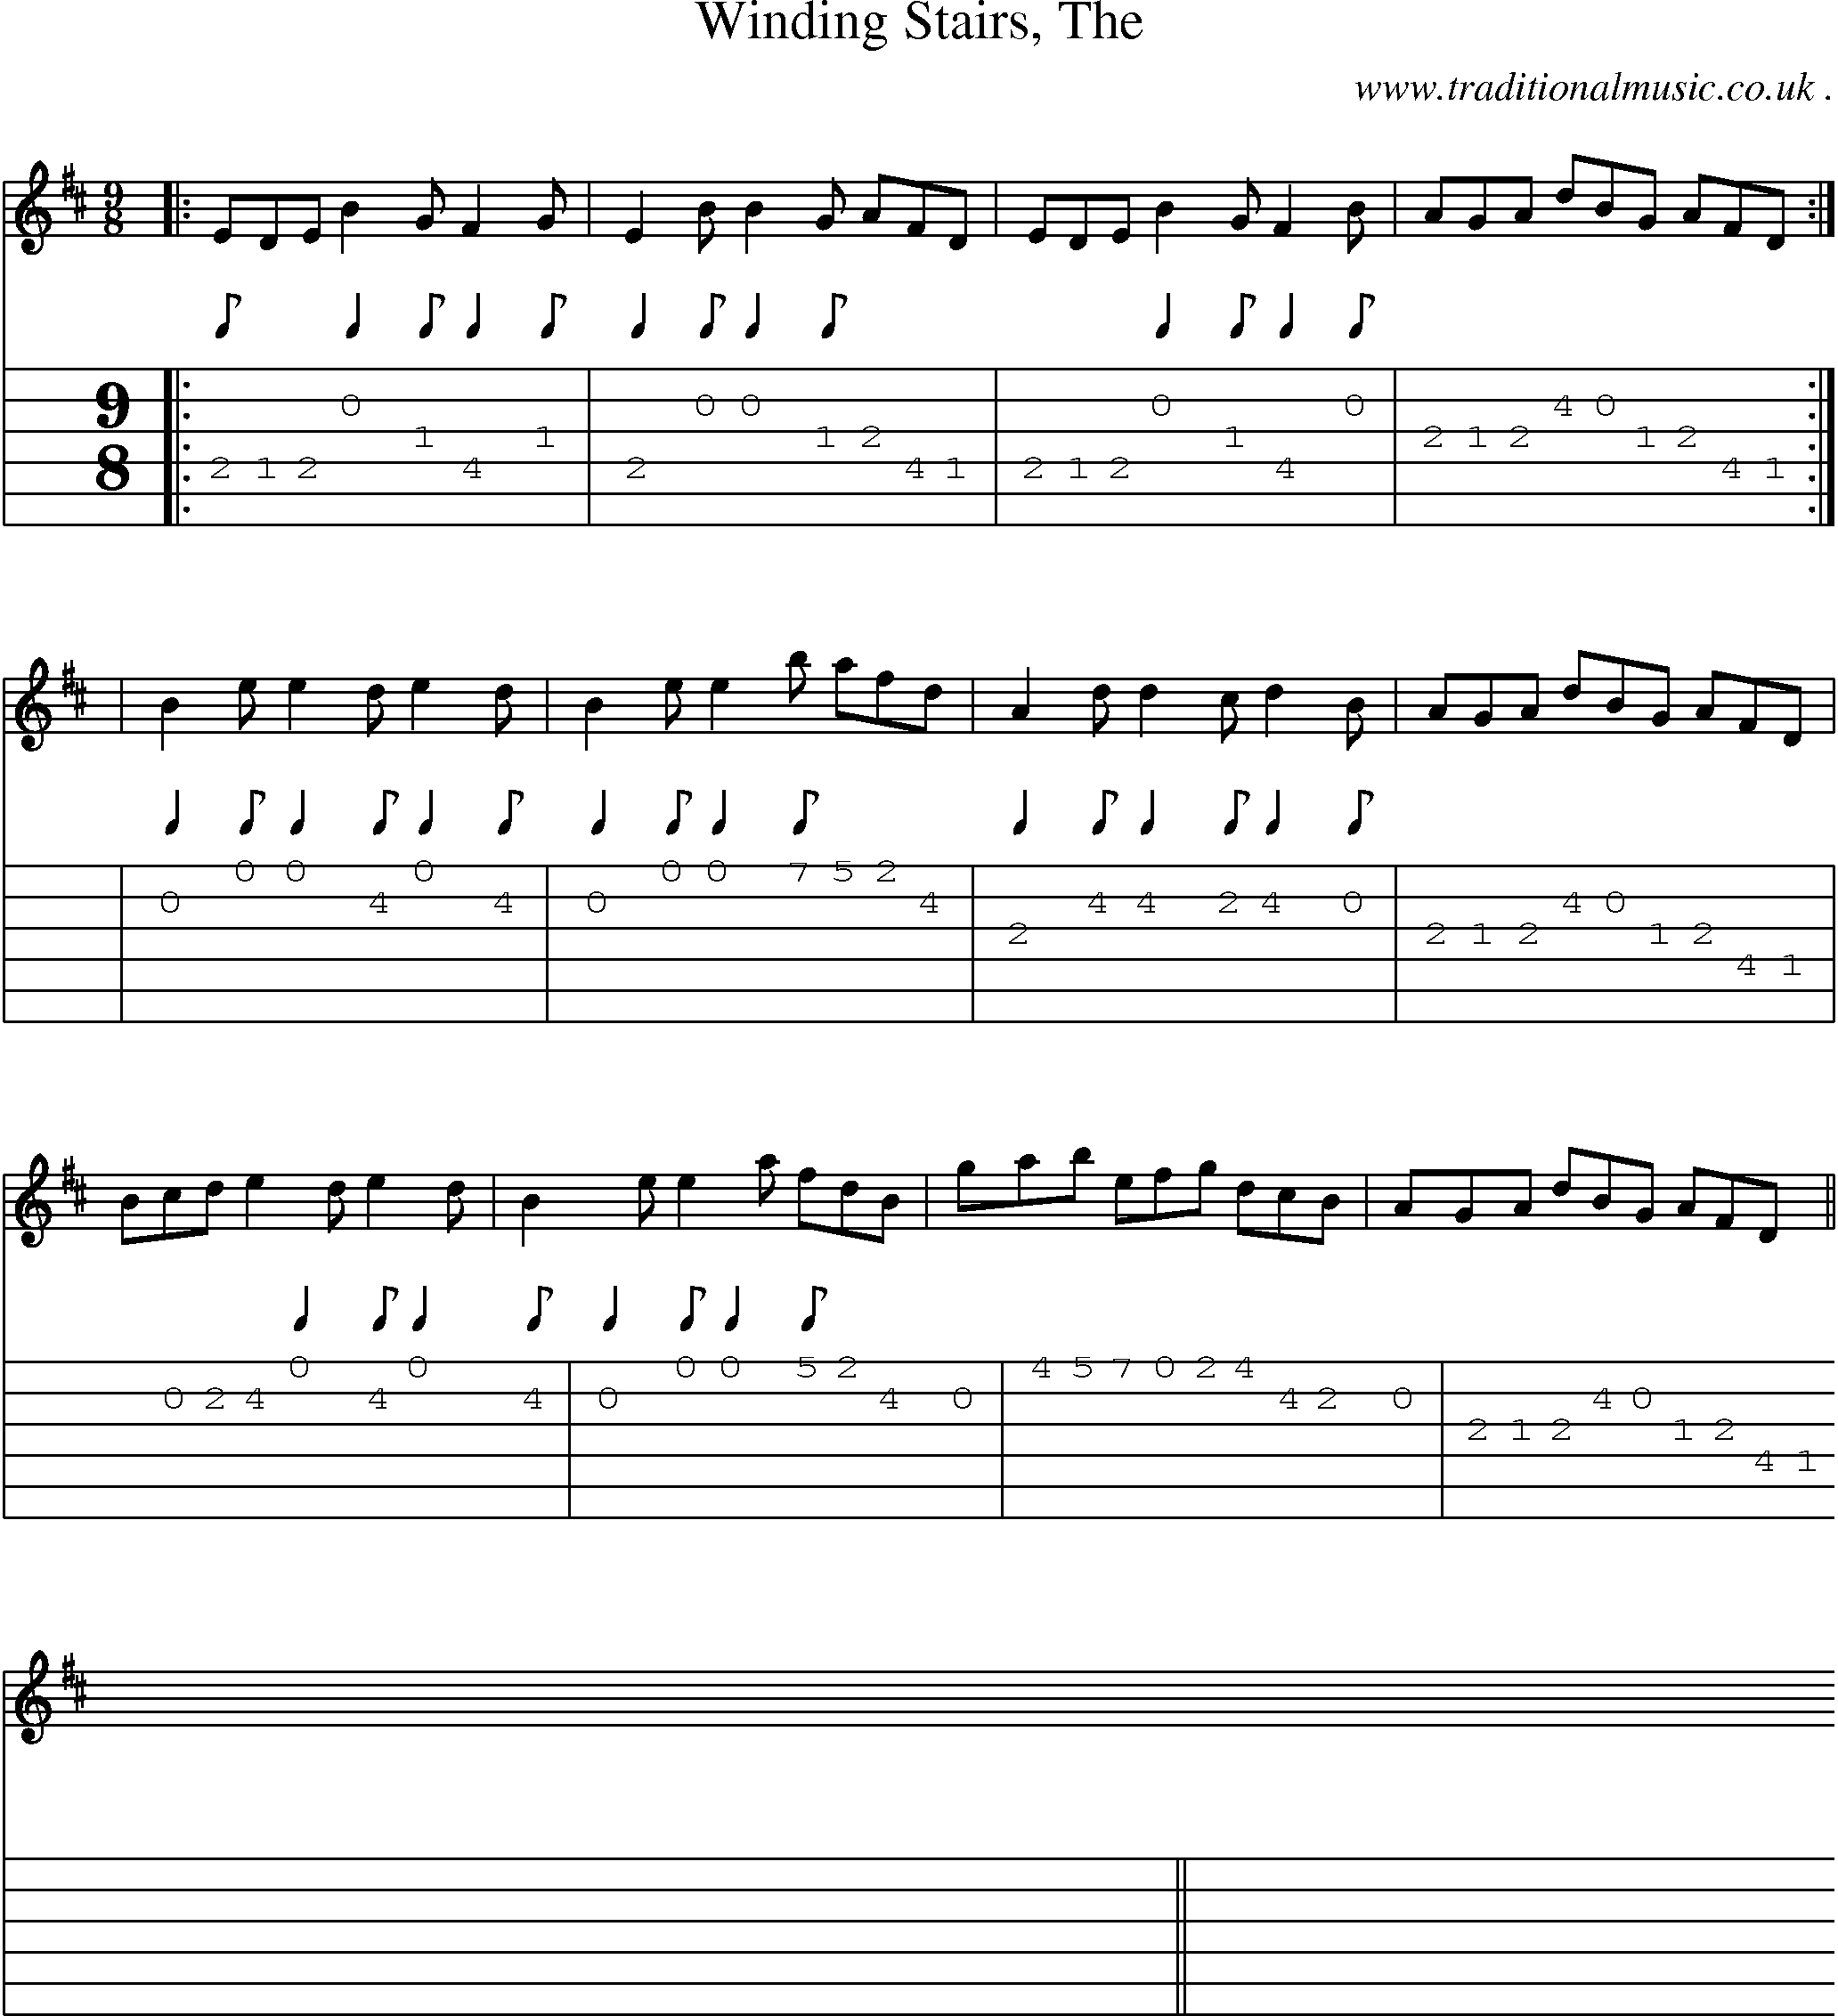 Sheet-music  score, Chords and Guitar Tabs for Winding Stairs The